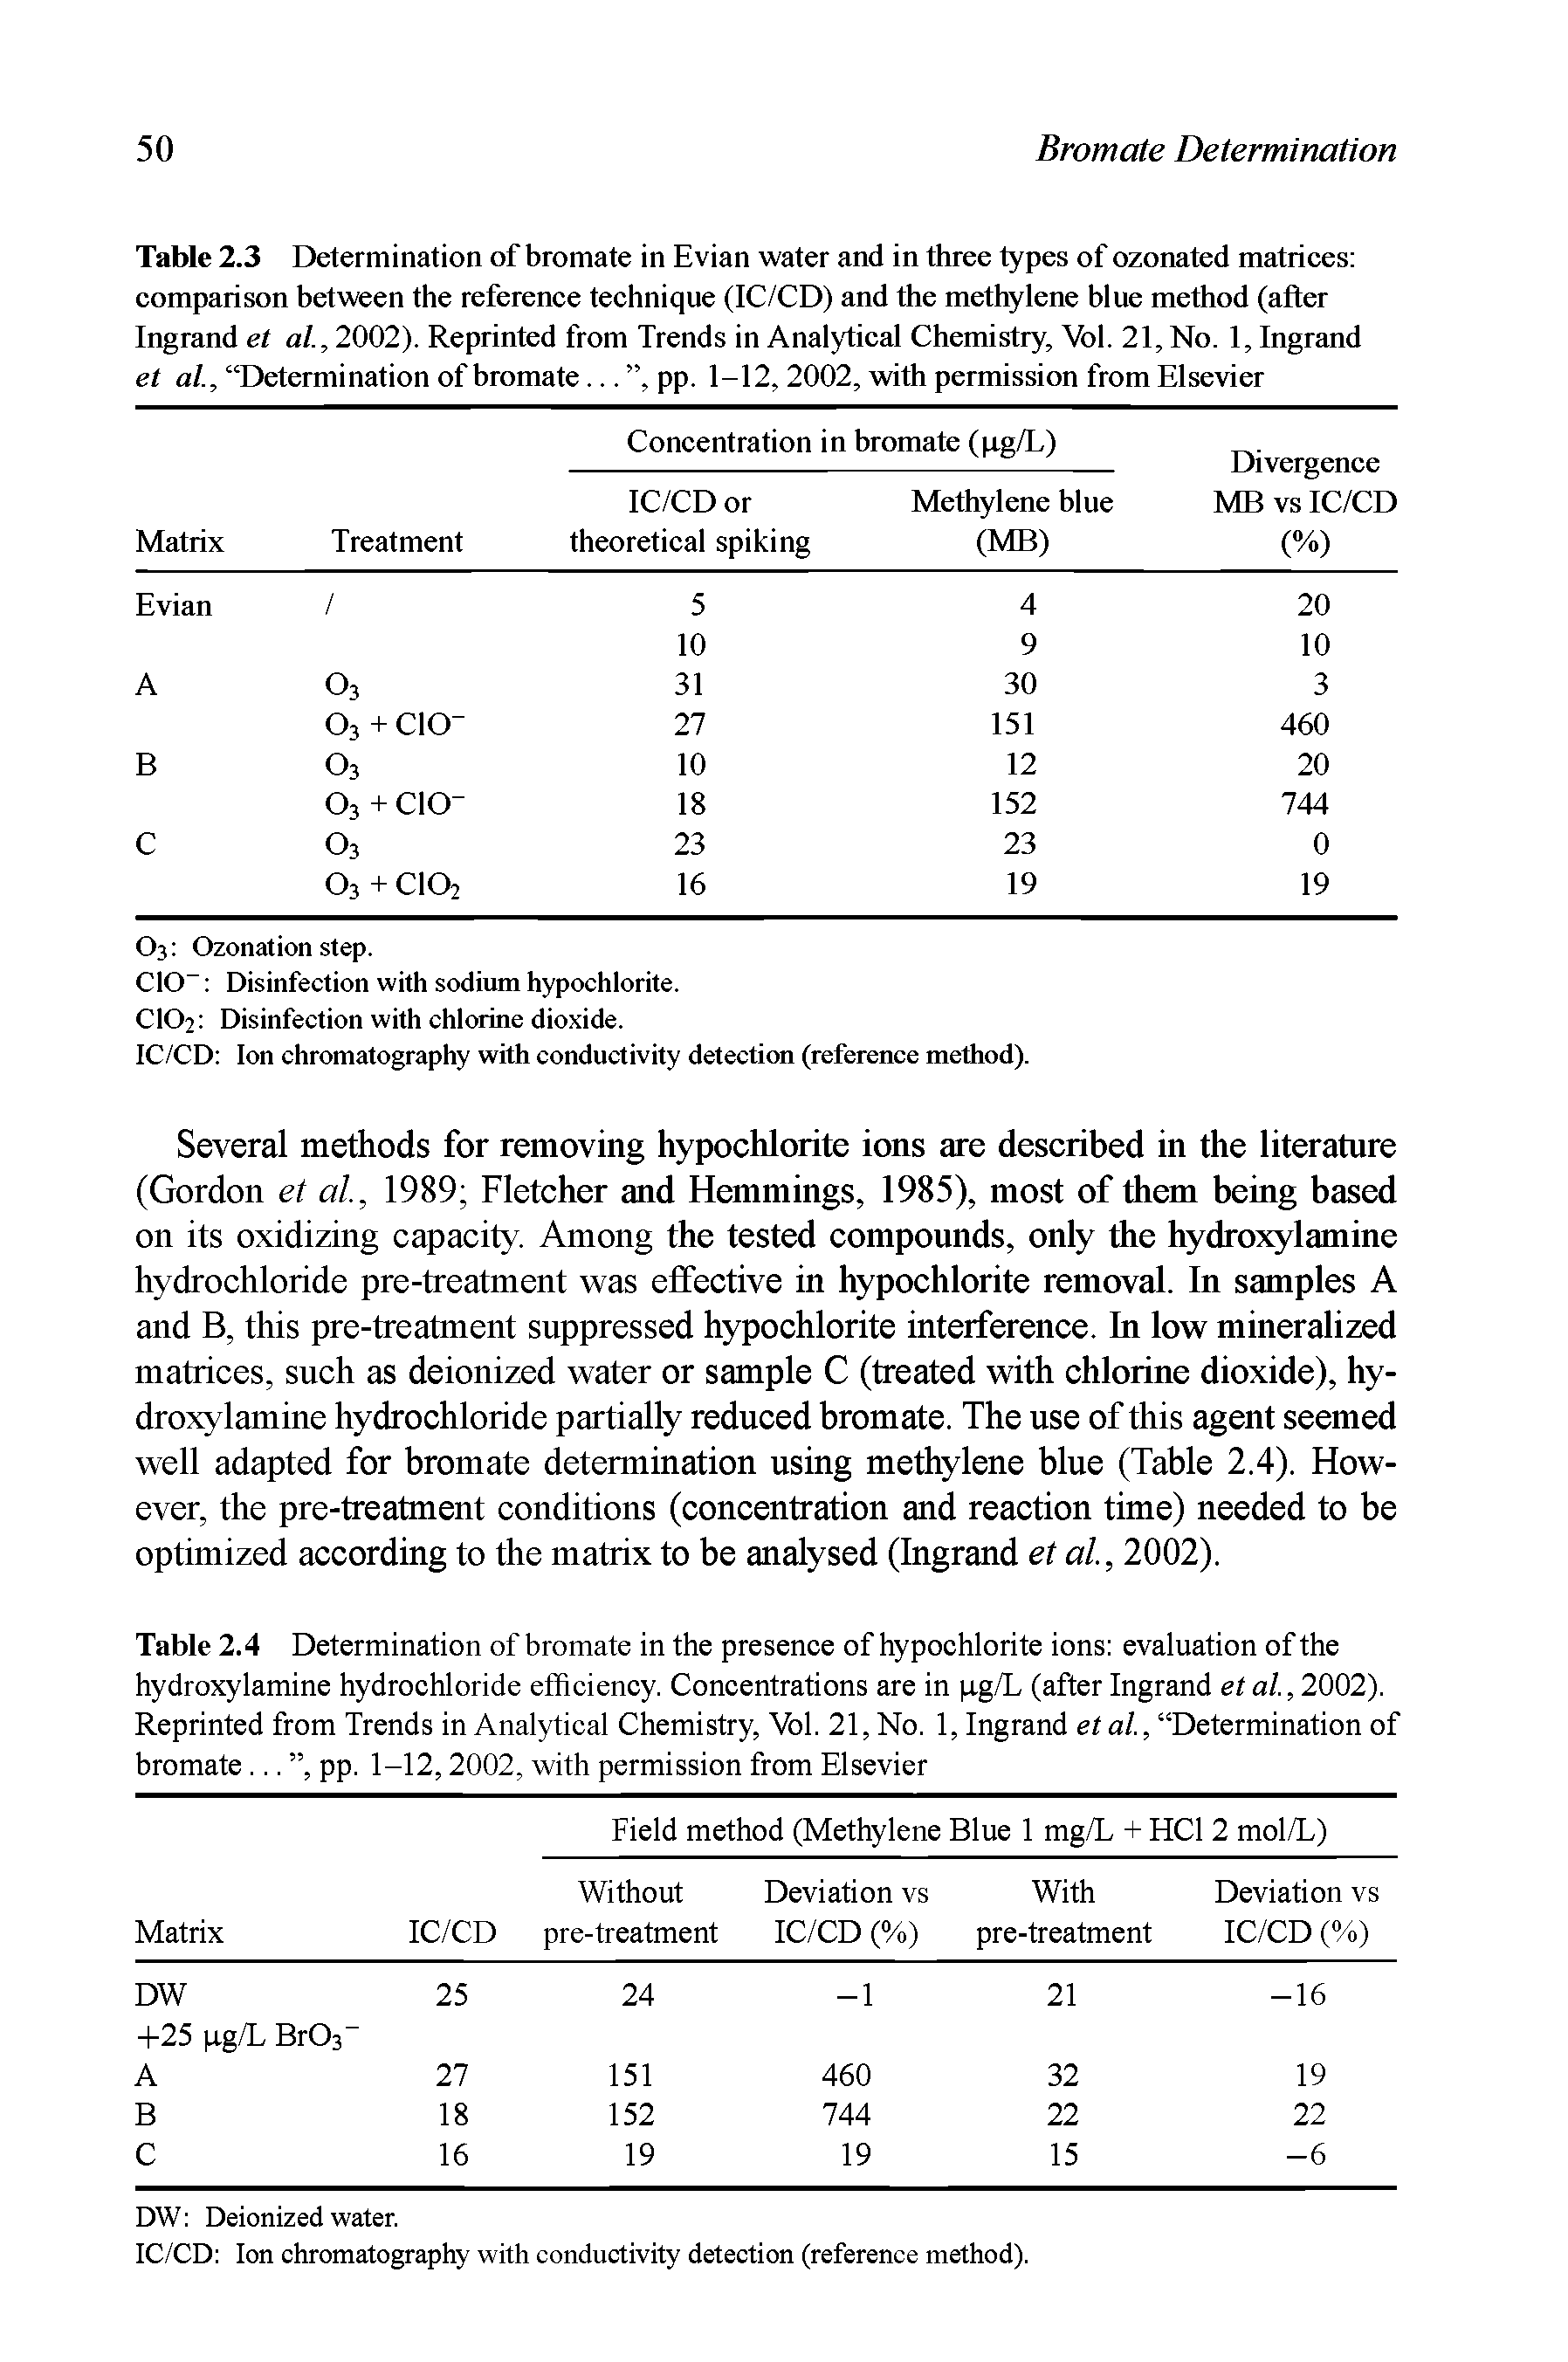 Table 2.3 Determination of bromate in Evian water and in three types of ozonated matrices comparison between the reference technique (IC/CD) and the methylene blue method (after Ingrand et at, 2002). Reprinted from Trends in Analytical Chemistry, Vol. 21, No. 1, Ingrand et at, Determination of bromate... , pp. 1-12, 2002, with permission from Elsevier...